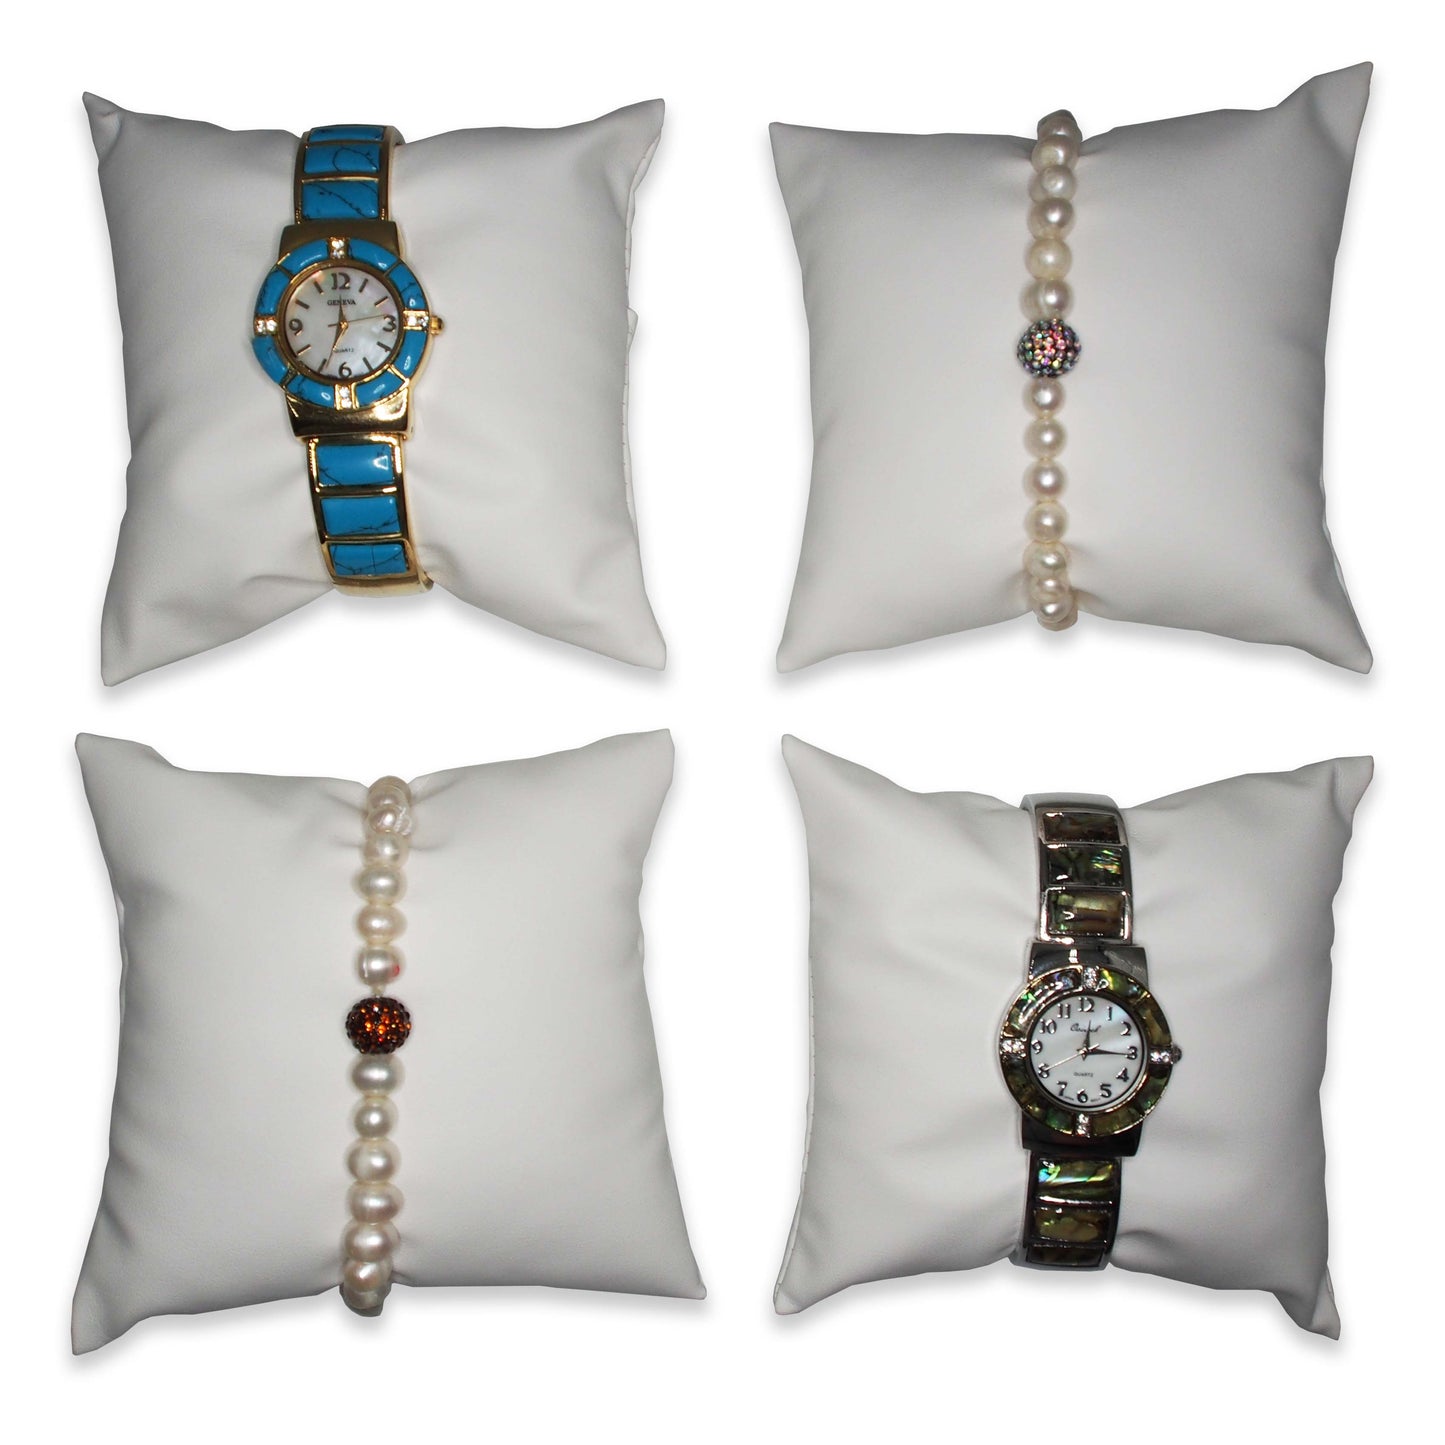 5" White Leatherette Pillow Displays